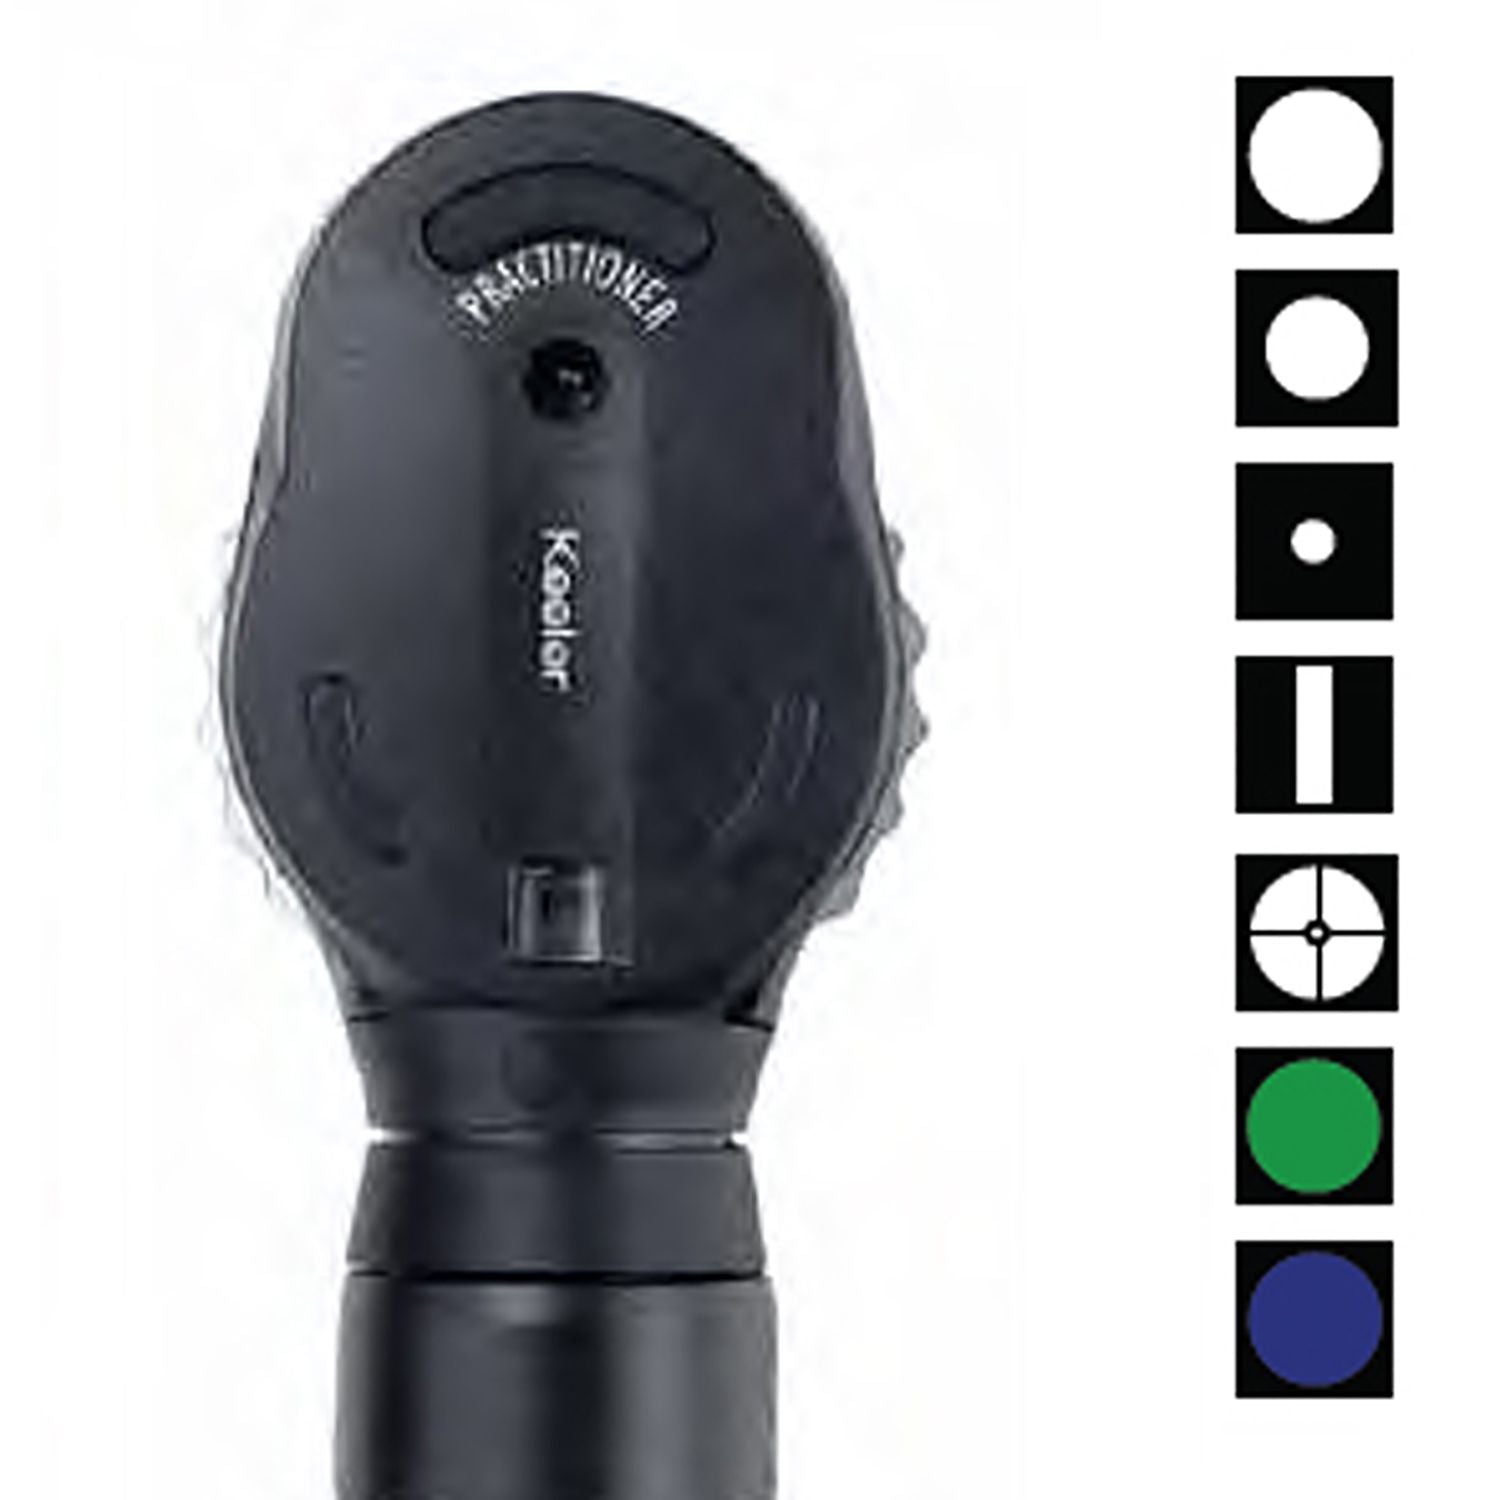 New Keeler Practioner Ophthalmoscope | 3.6v Head & Bulb Only In Carton